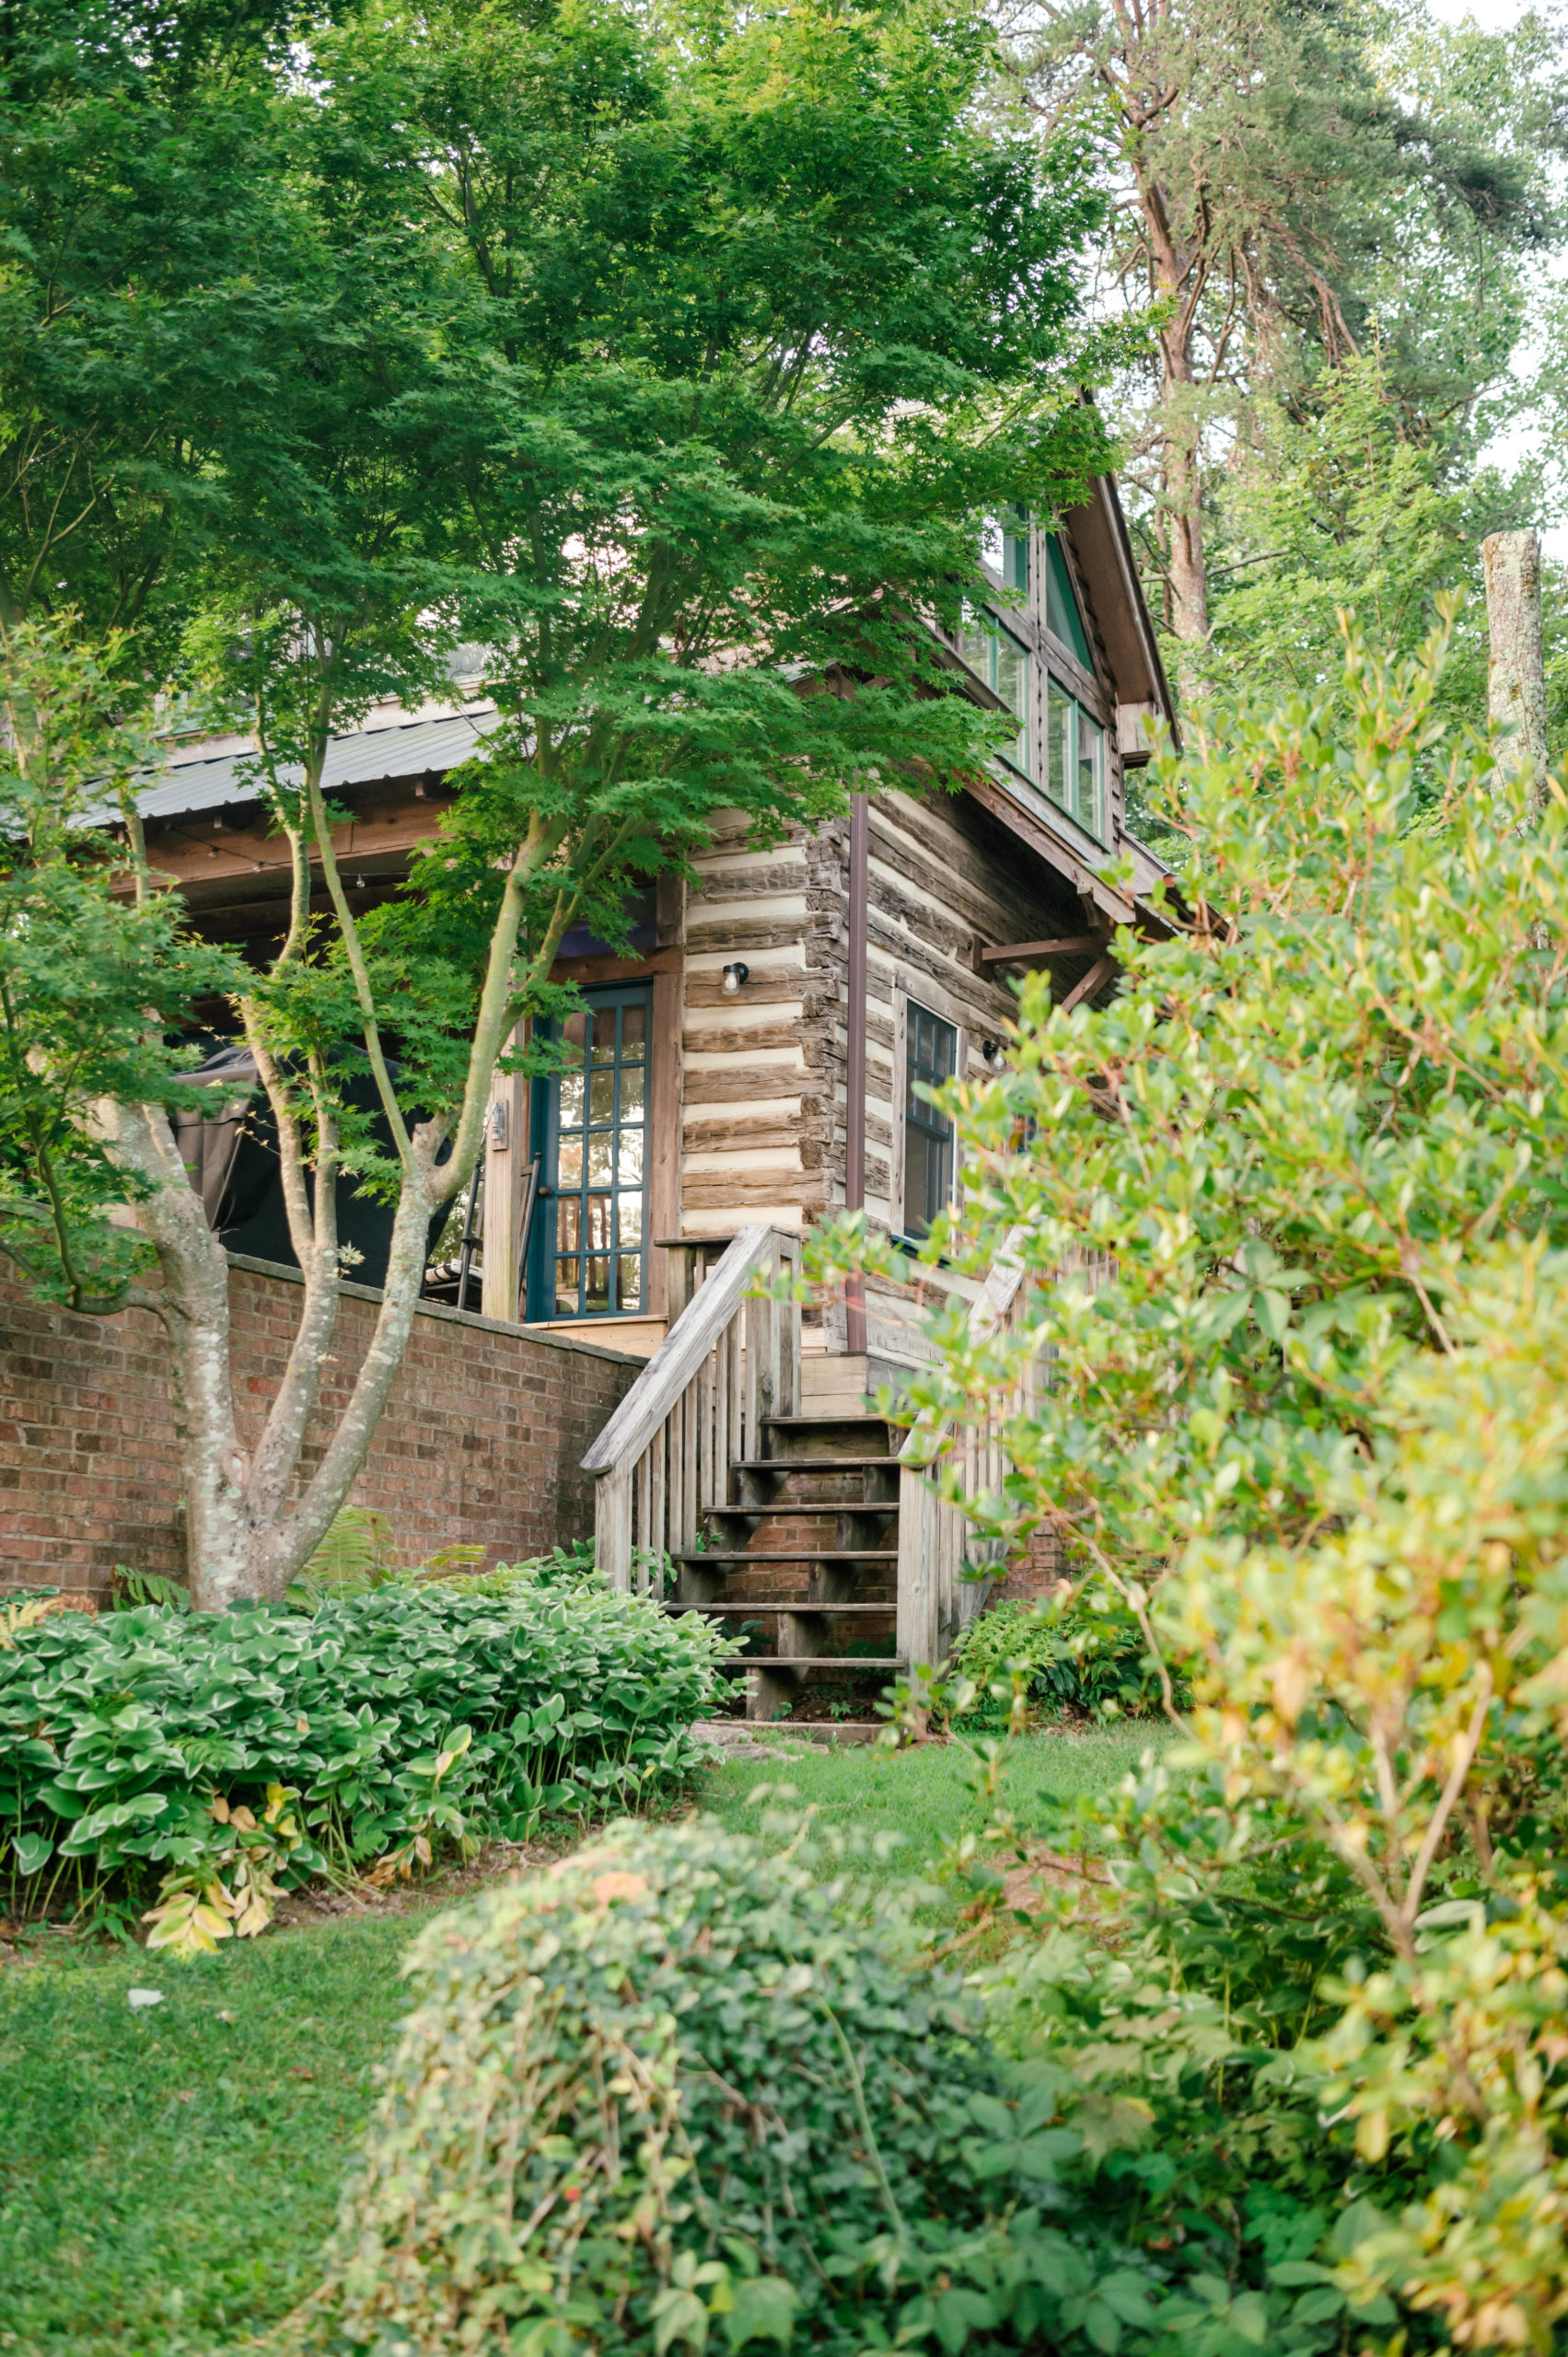 Professional air bnb photography of beautiful Cherry mountain cabin with greenery